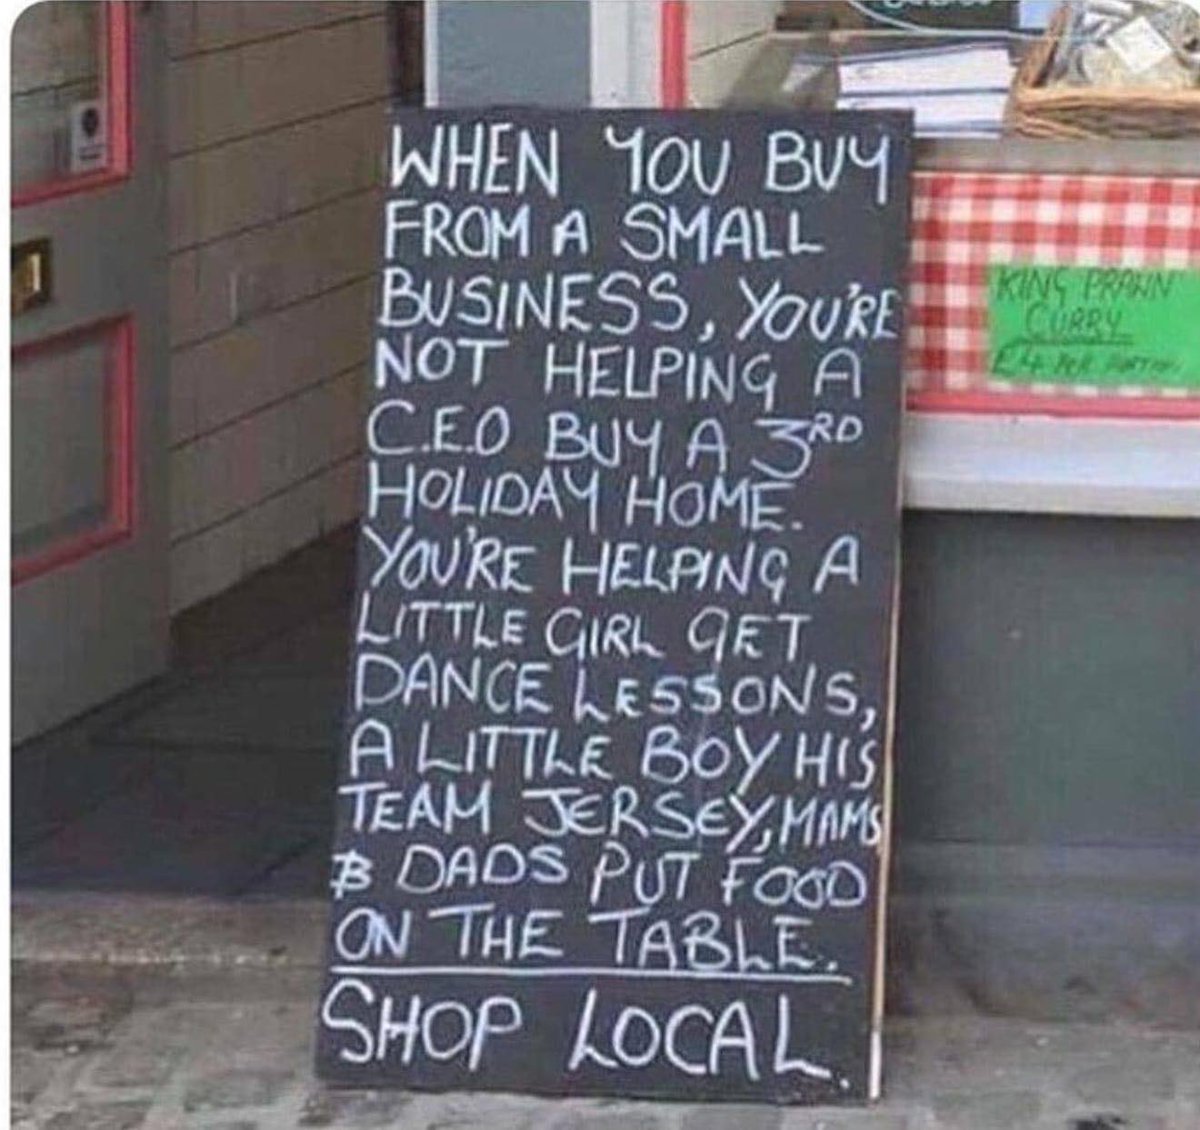 It's more important than ever to support small British businesses 🚜🇬🇧